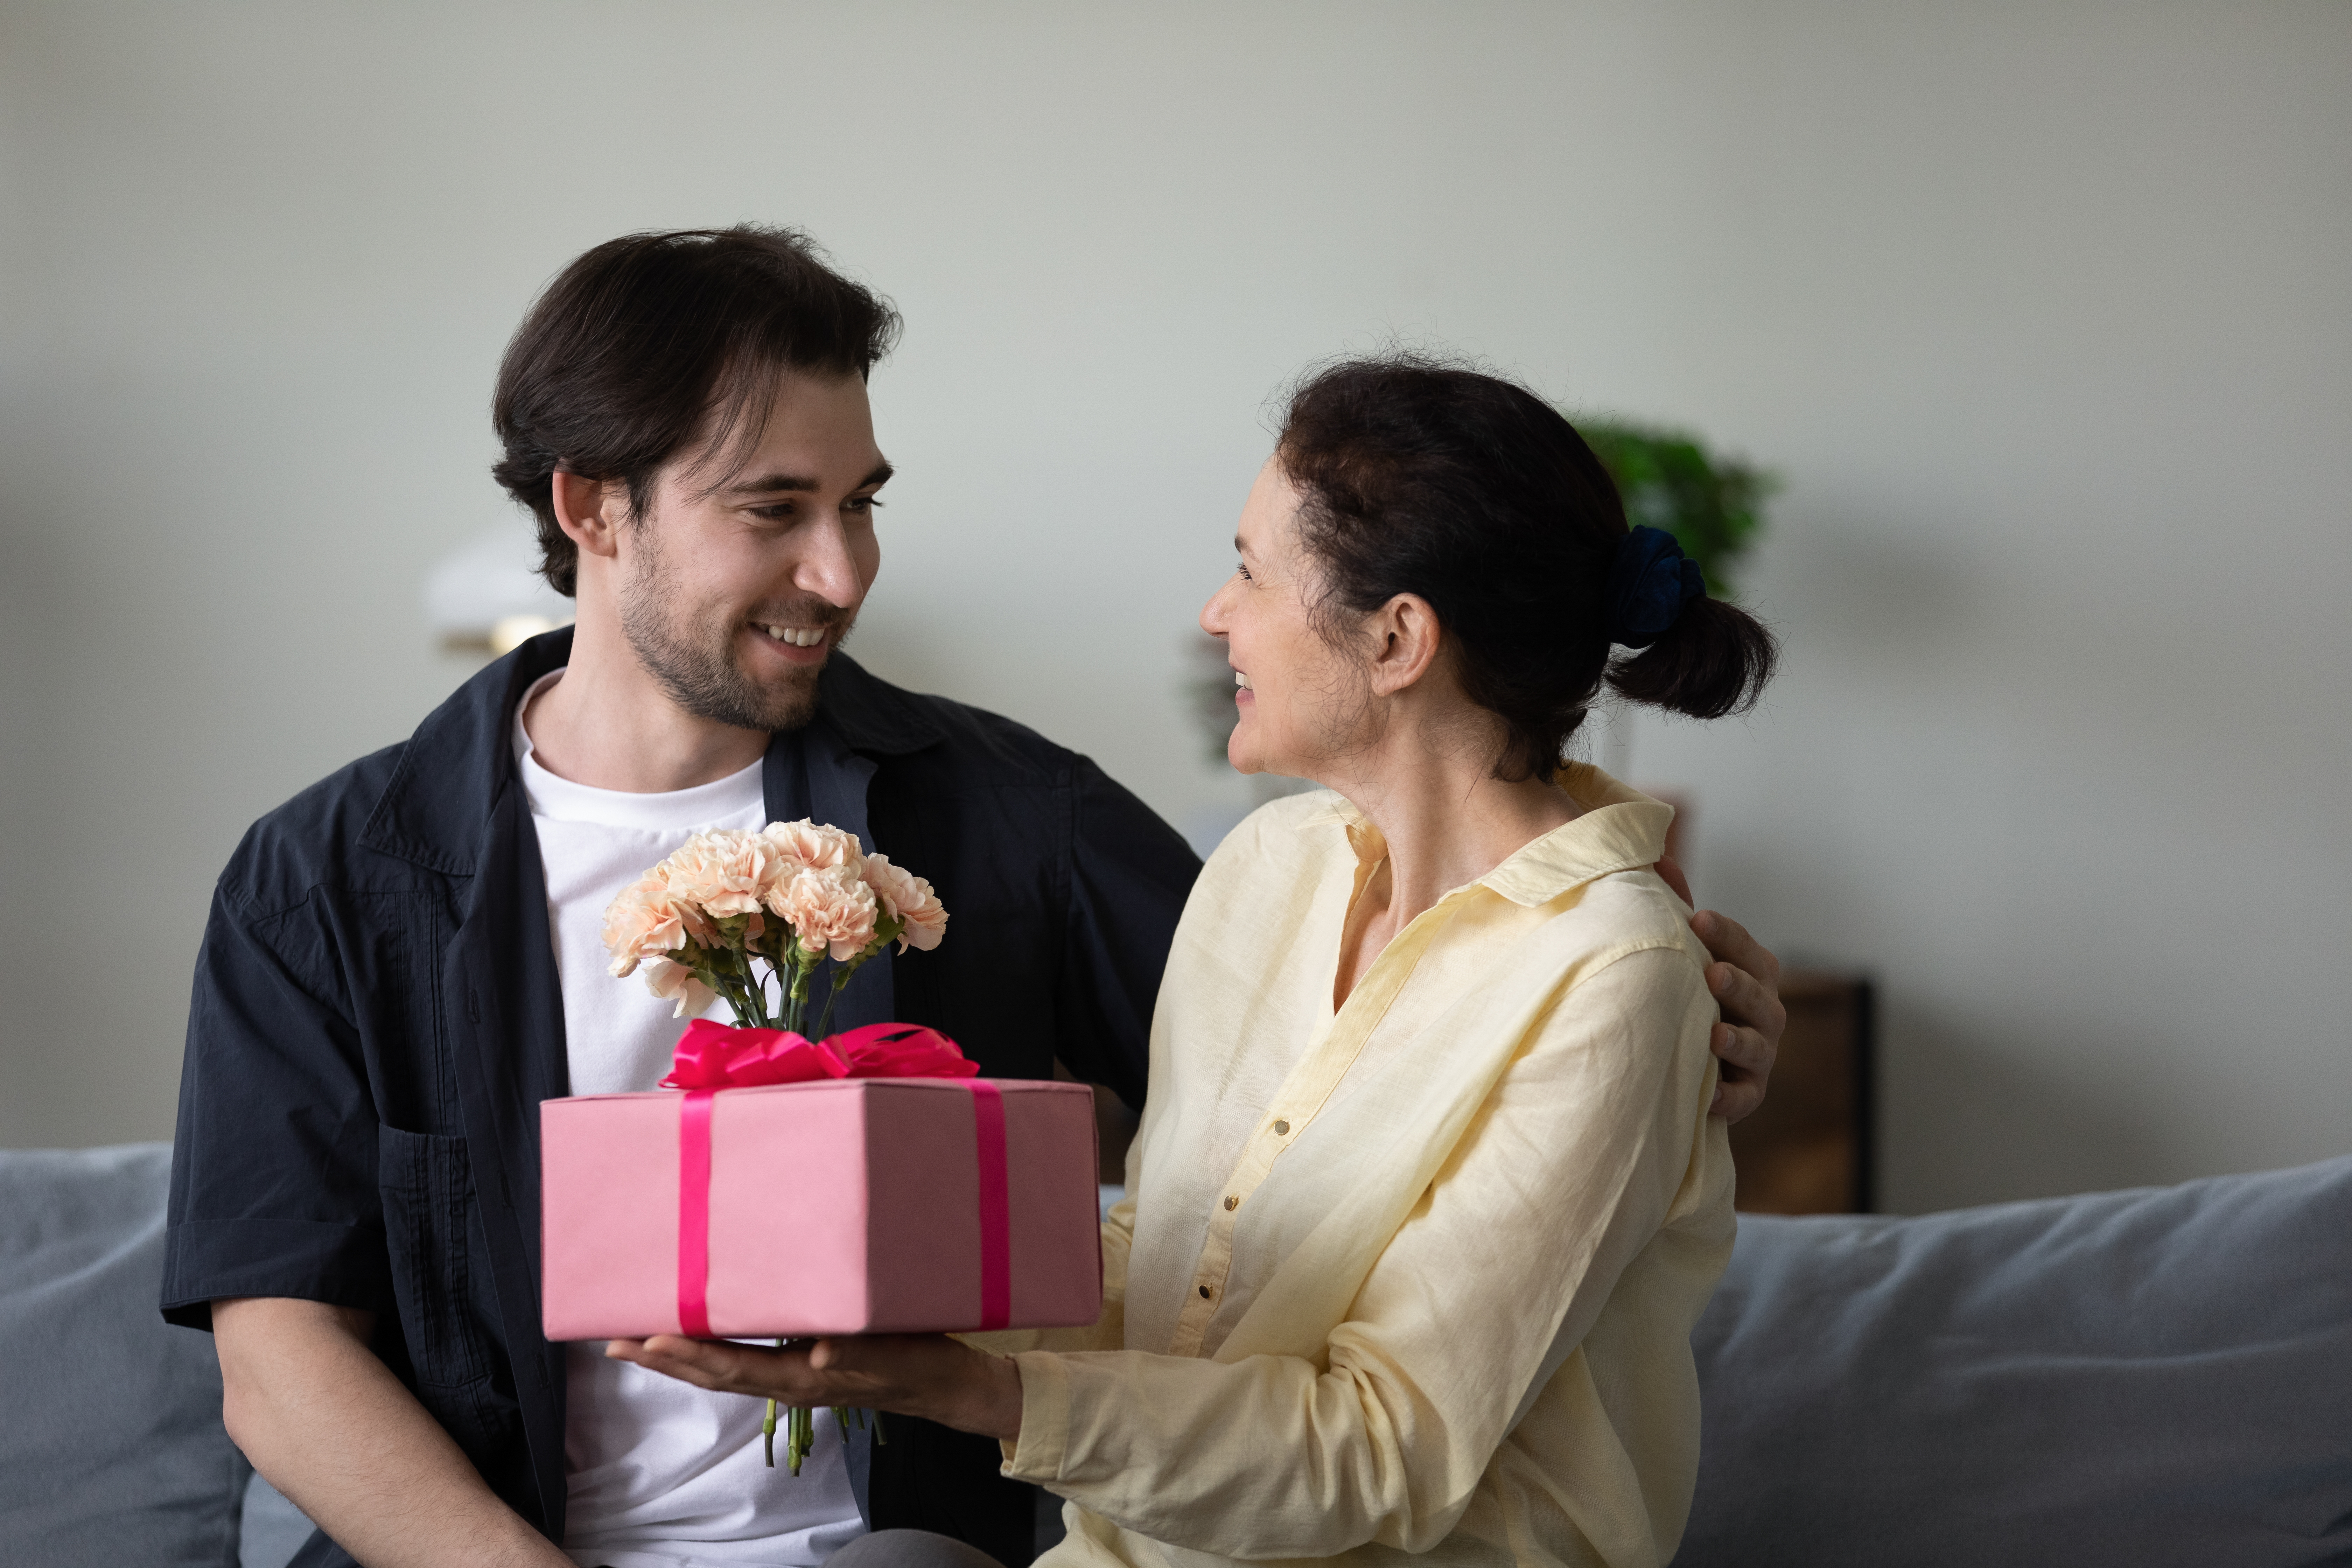 An older woman giving a gift to a man | Source: Shutterstock